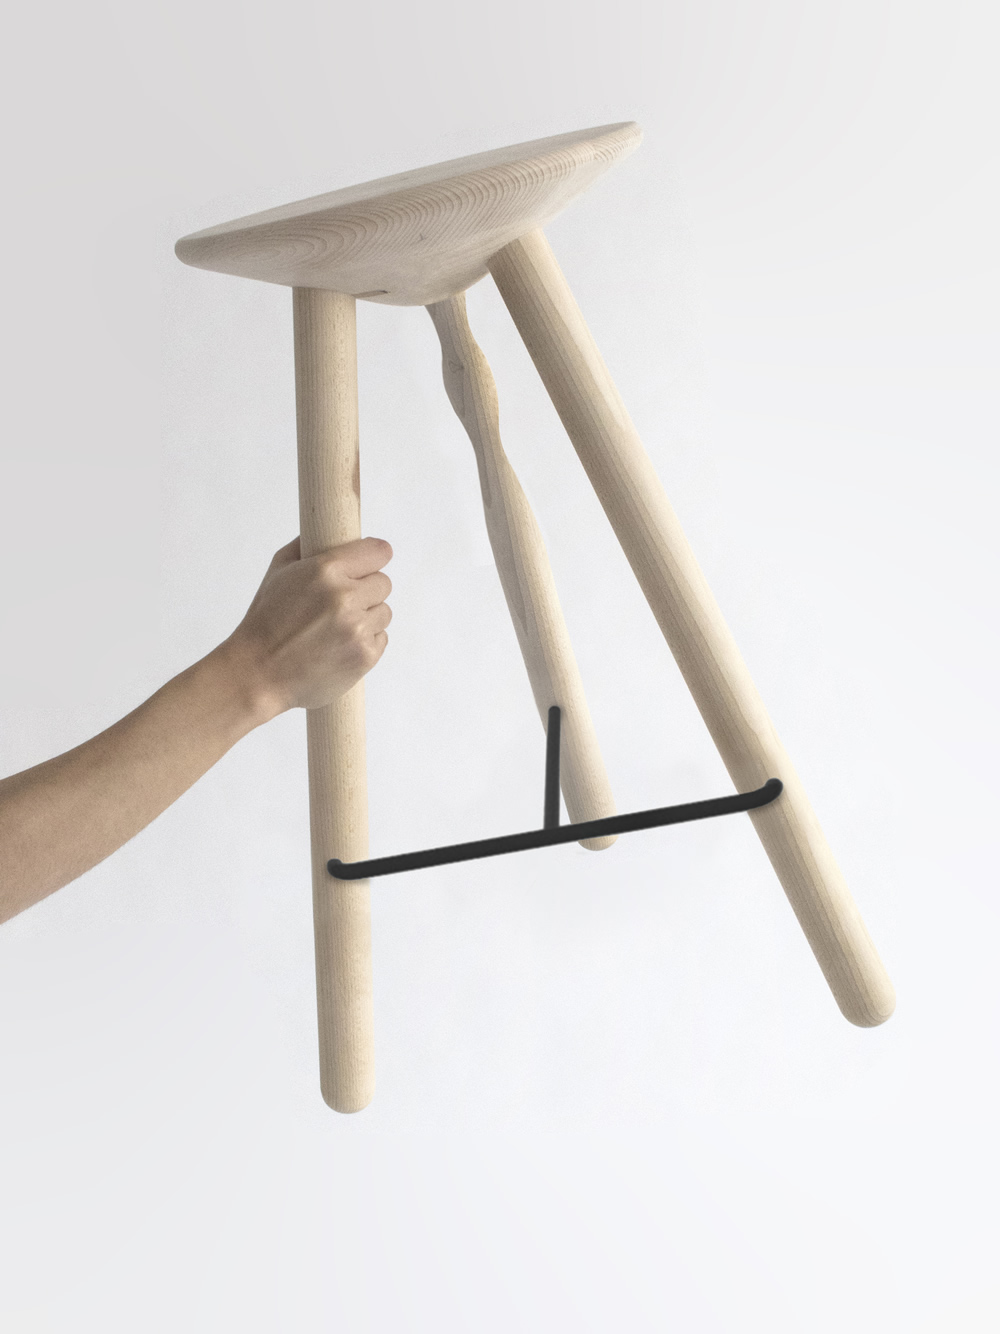 Luco Stool by Martín Azúa for Mobles 114